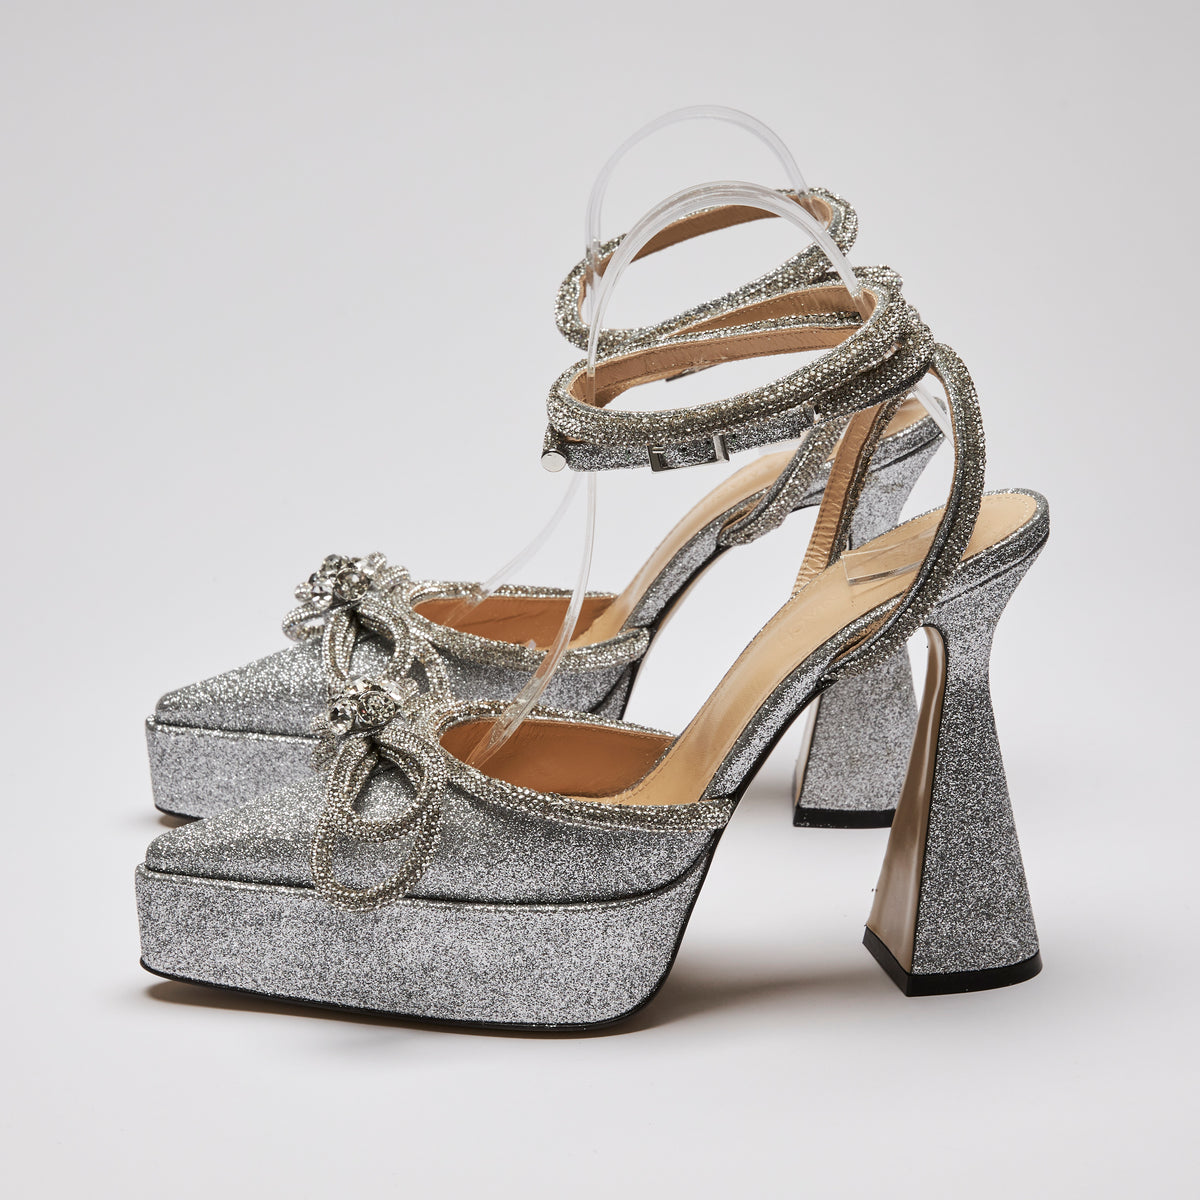 Excellent Pre-Loved Silver Glittered Point Toe Platform Heels with Ankle Straps and Crystal Embellished Double Bow(side)